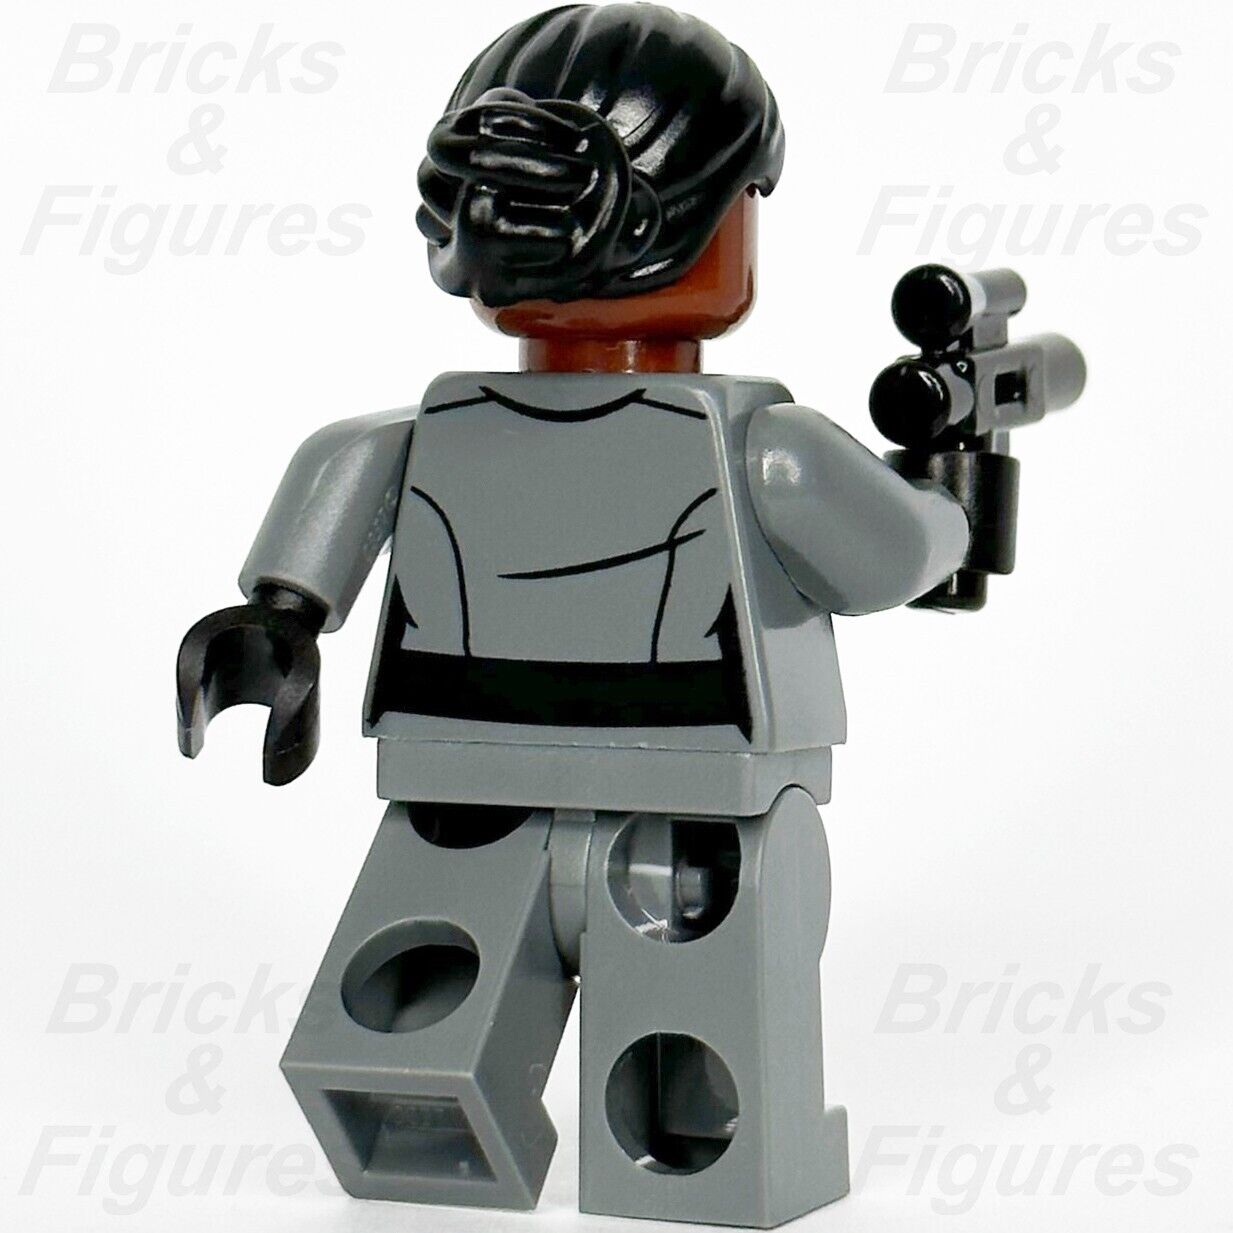 LEGO Star Wars Vice Admiral Sloane Minifigure Imperial Officer 75347 sw1250 New - Bricks & Figures